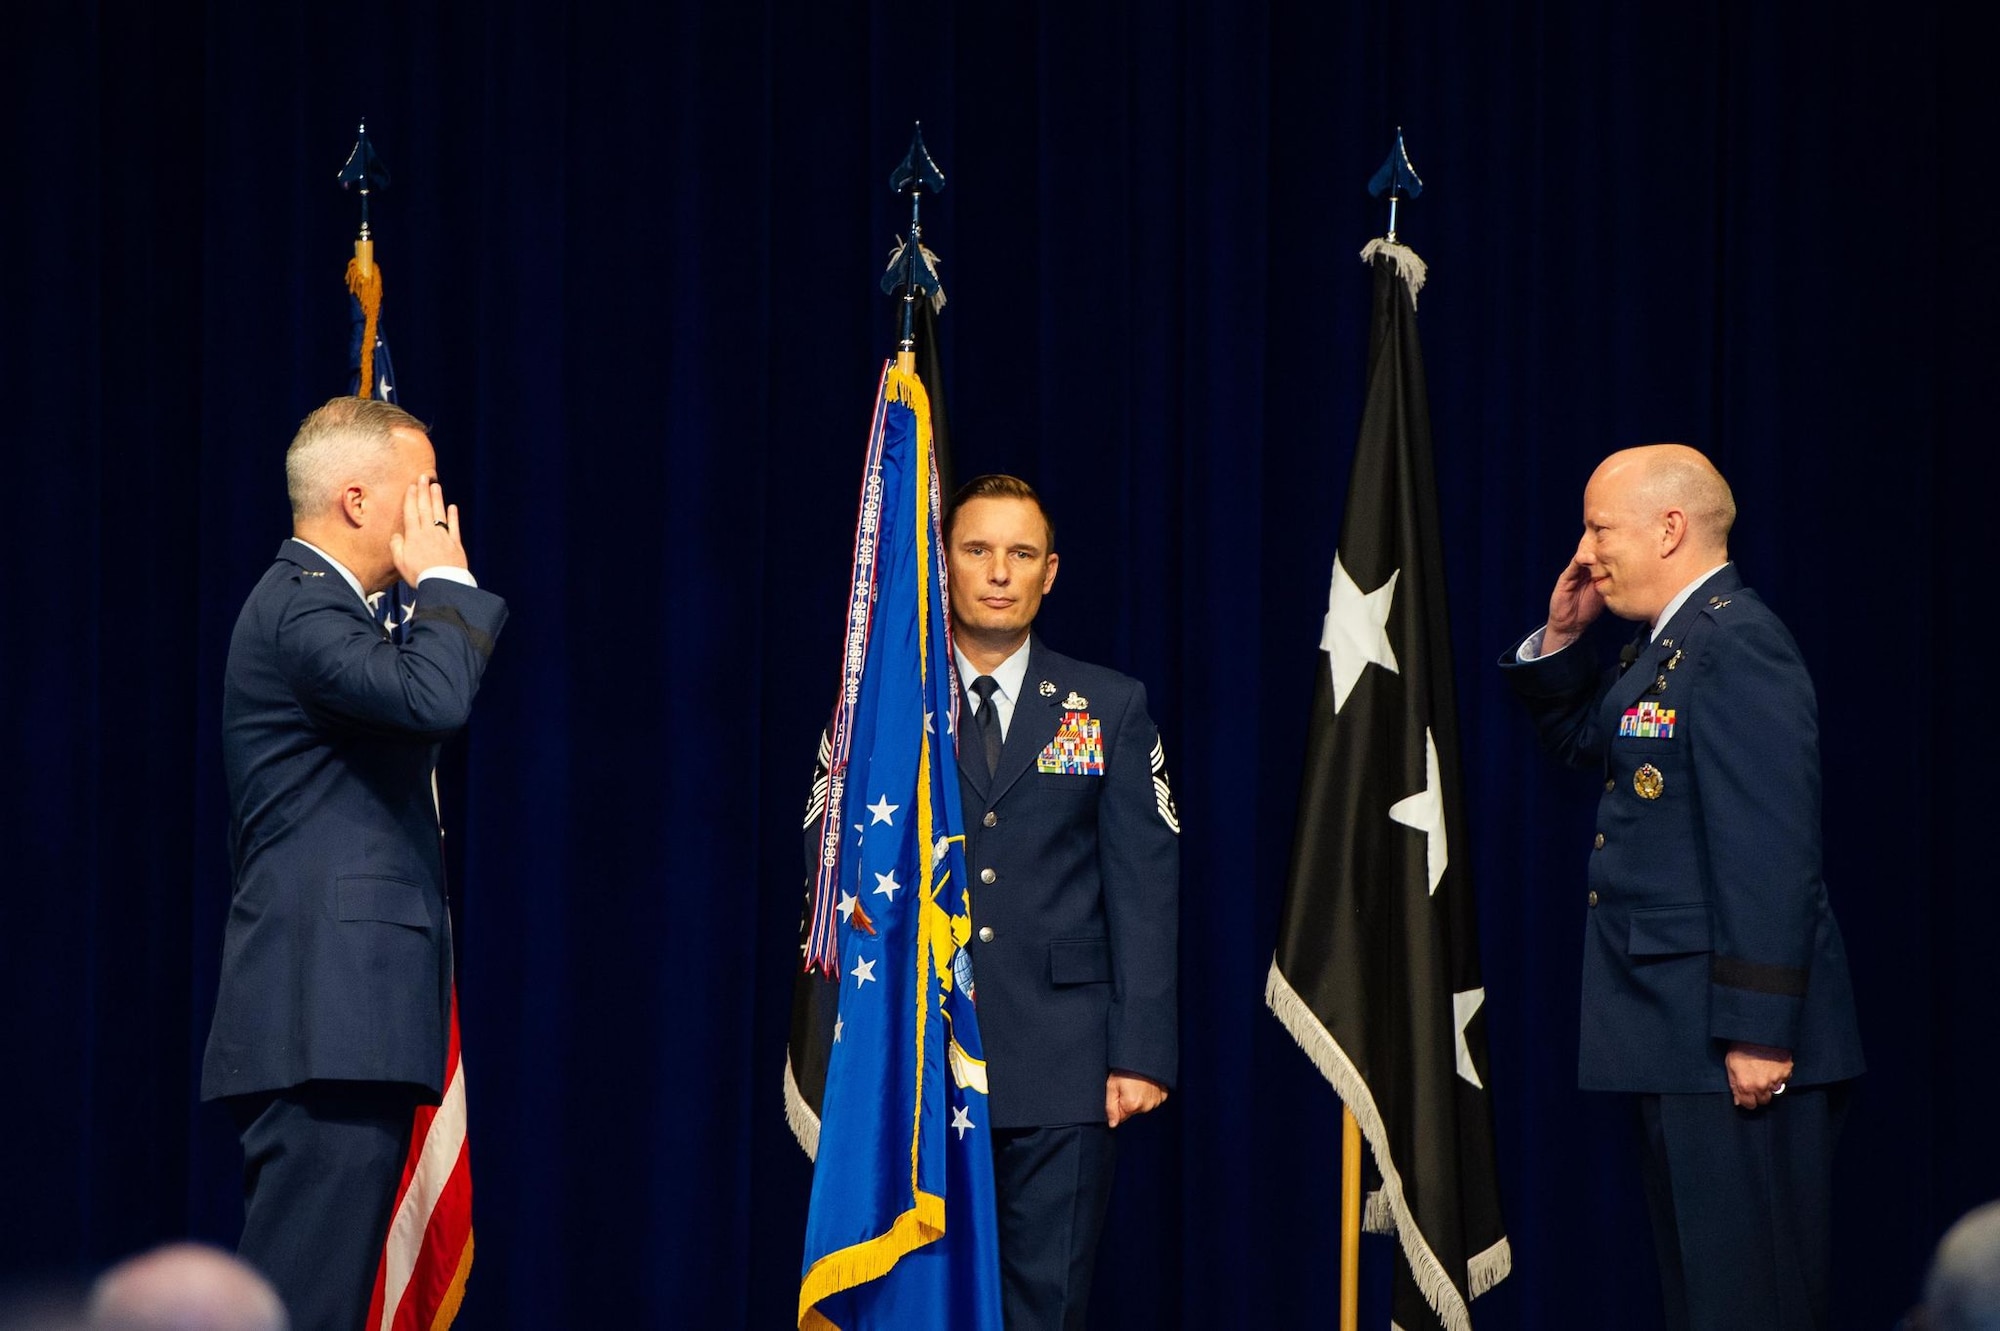 Brig. Gen. Stephen Purdy assumed command of the 45th Space Wing and Eastern Range in a ceremony held Jan. 5, 2021, at Patrick Space Force Base, Fla. The ceremony was presided over by Lt. Gen. Stephen Whiting, commander of Space Operations Command. (U.S. Space Force photo by Amanda Ryrholm)